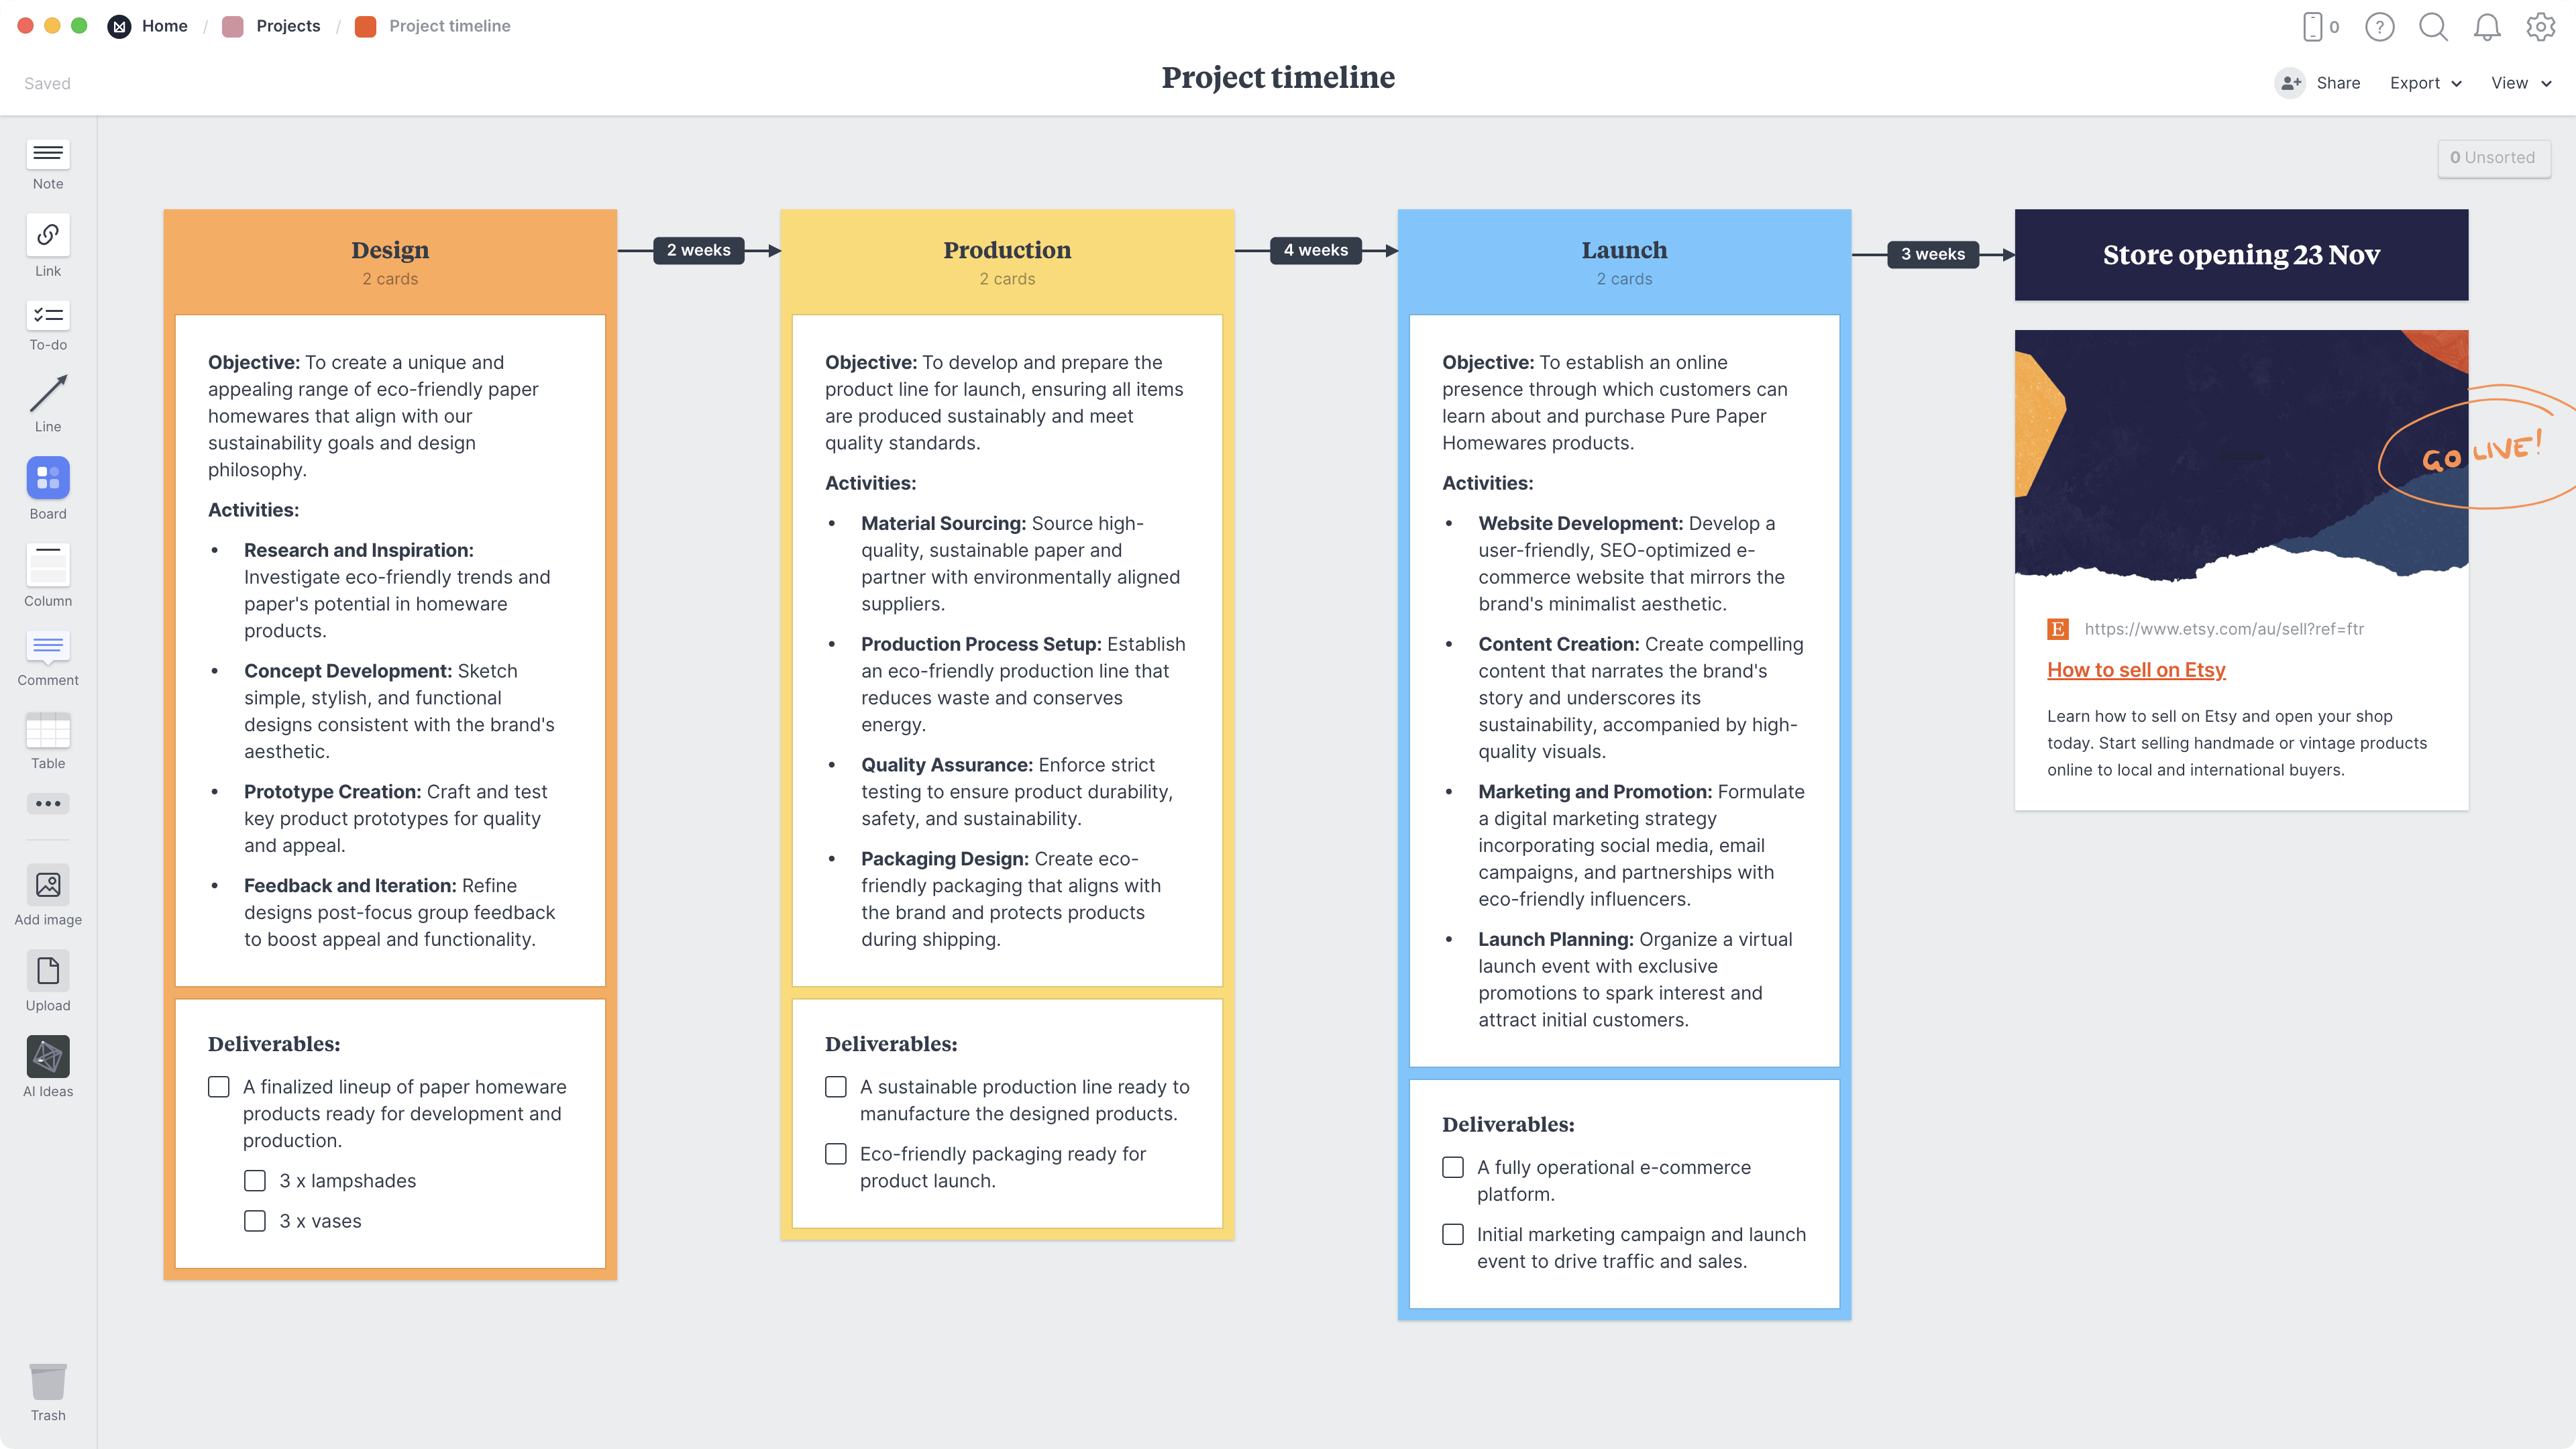 Craft Project Timeline Template, within the Milanote app